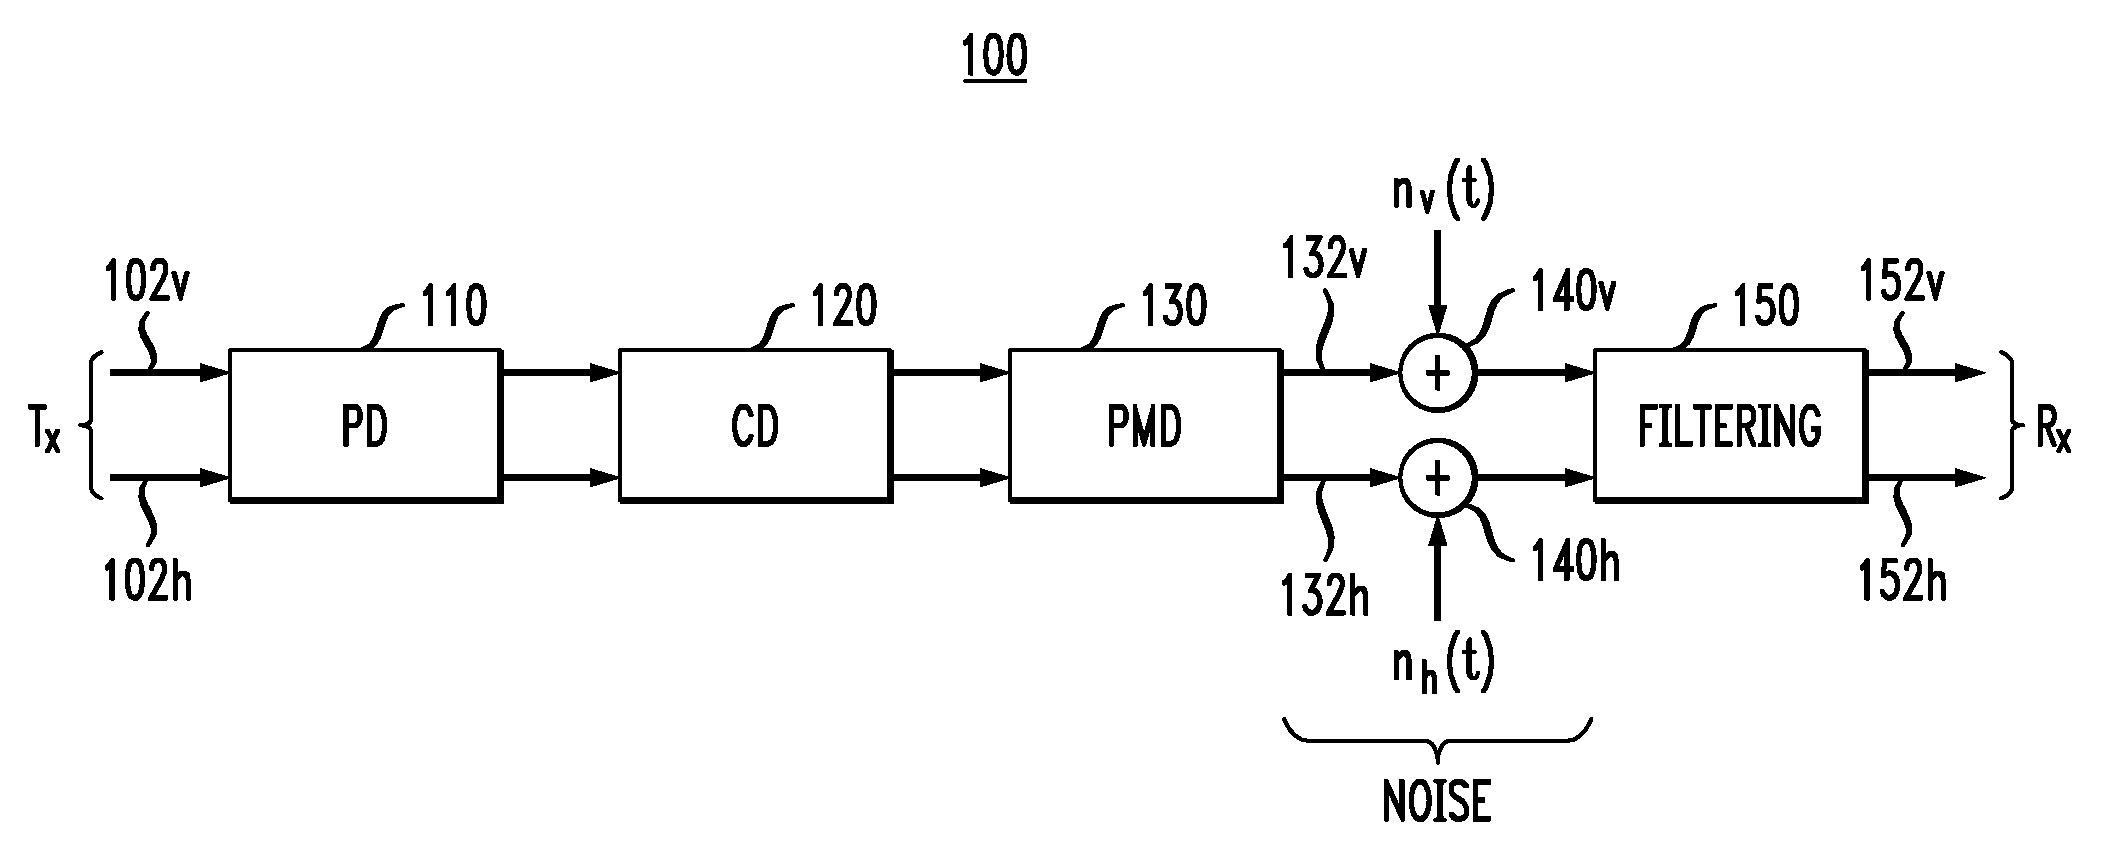 Polarization tracking and signal equalization for optical receivers configured for on-off keying or pulse amplitude modulation signaling